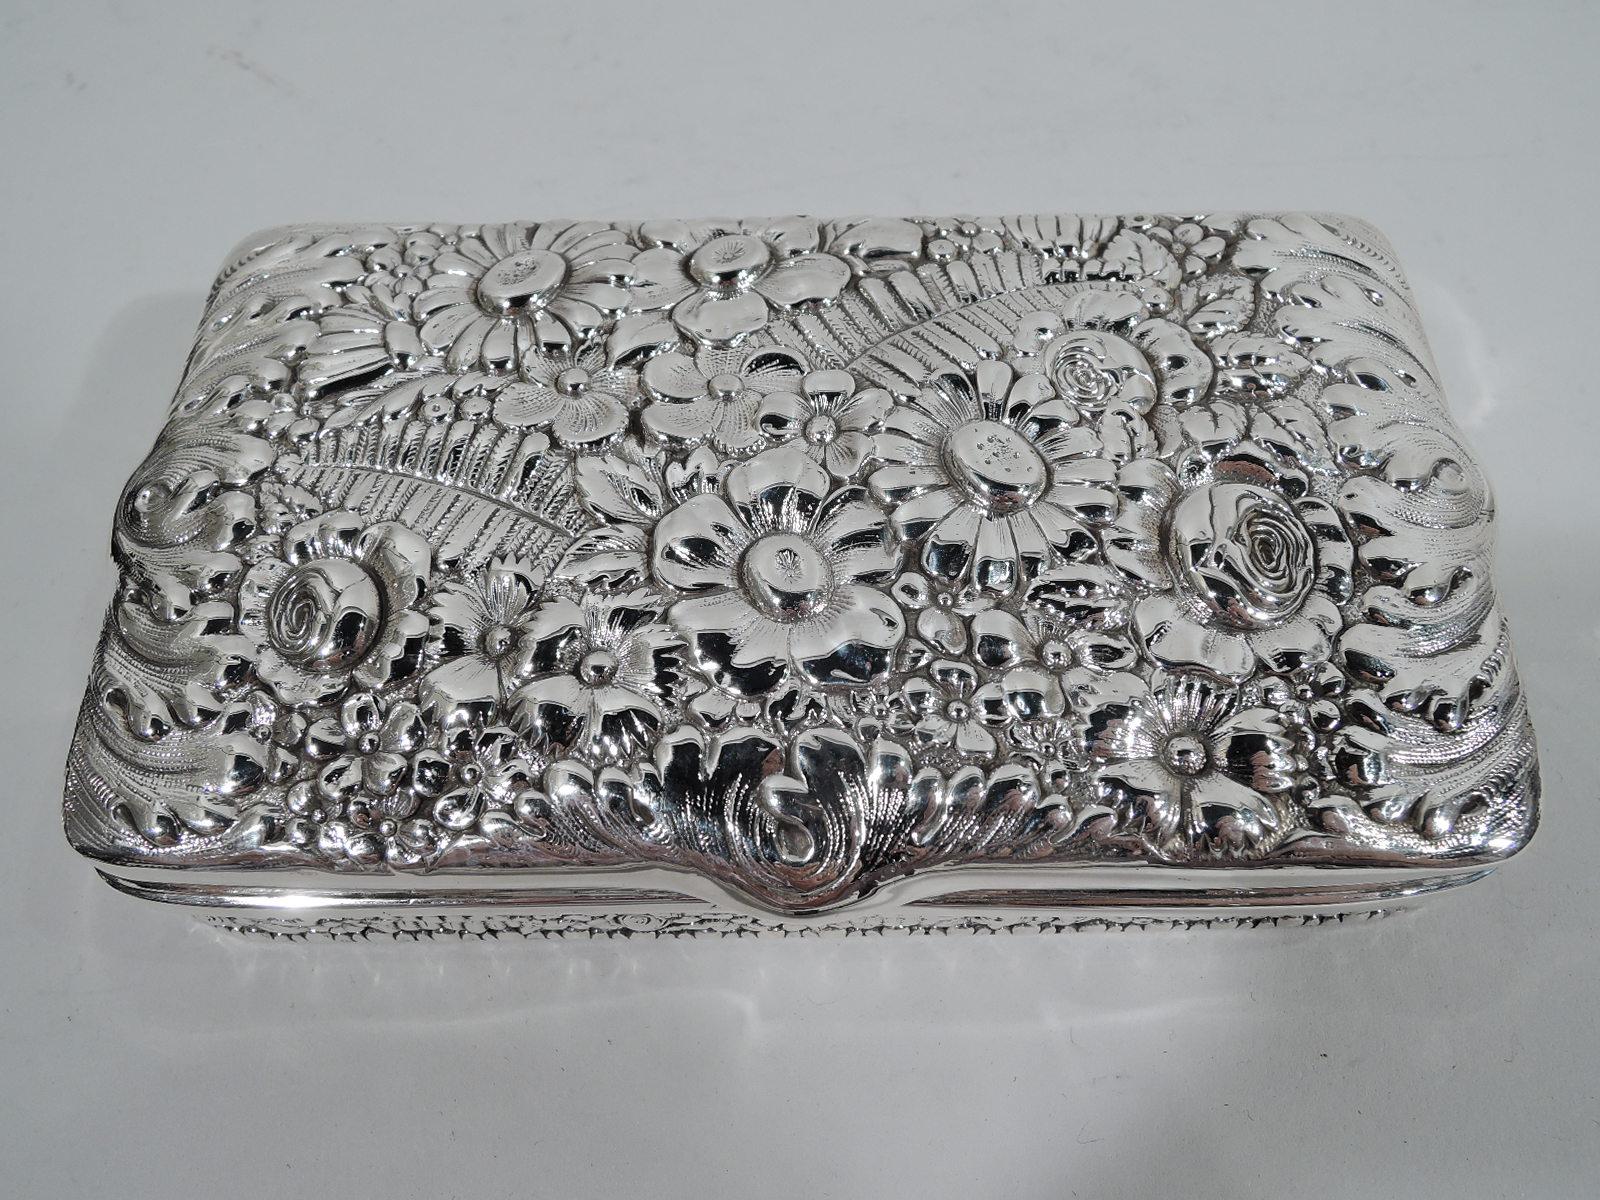 Pretty sterling silver box. Made by Tiffany & Co. in New York. Rectangular with curved corners and hinged cover. Cover top has dense floral repousse as does box sides. Interior gilt washed. Box interior partitioned. Compact and tactile. Fully marked